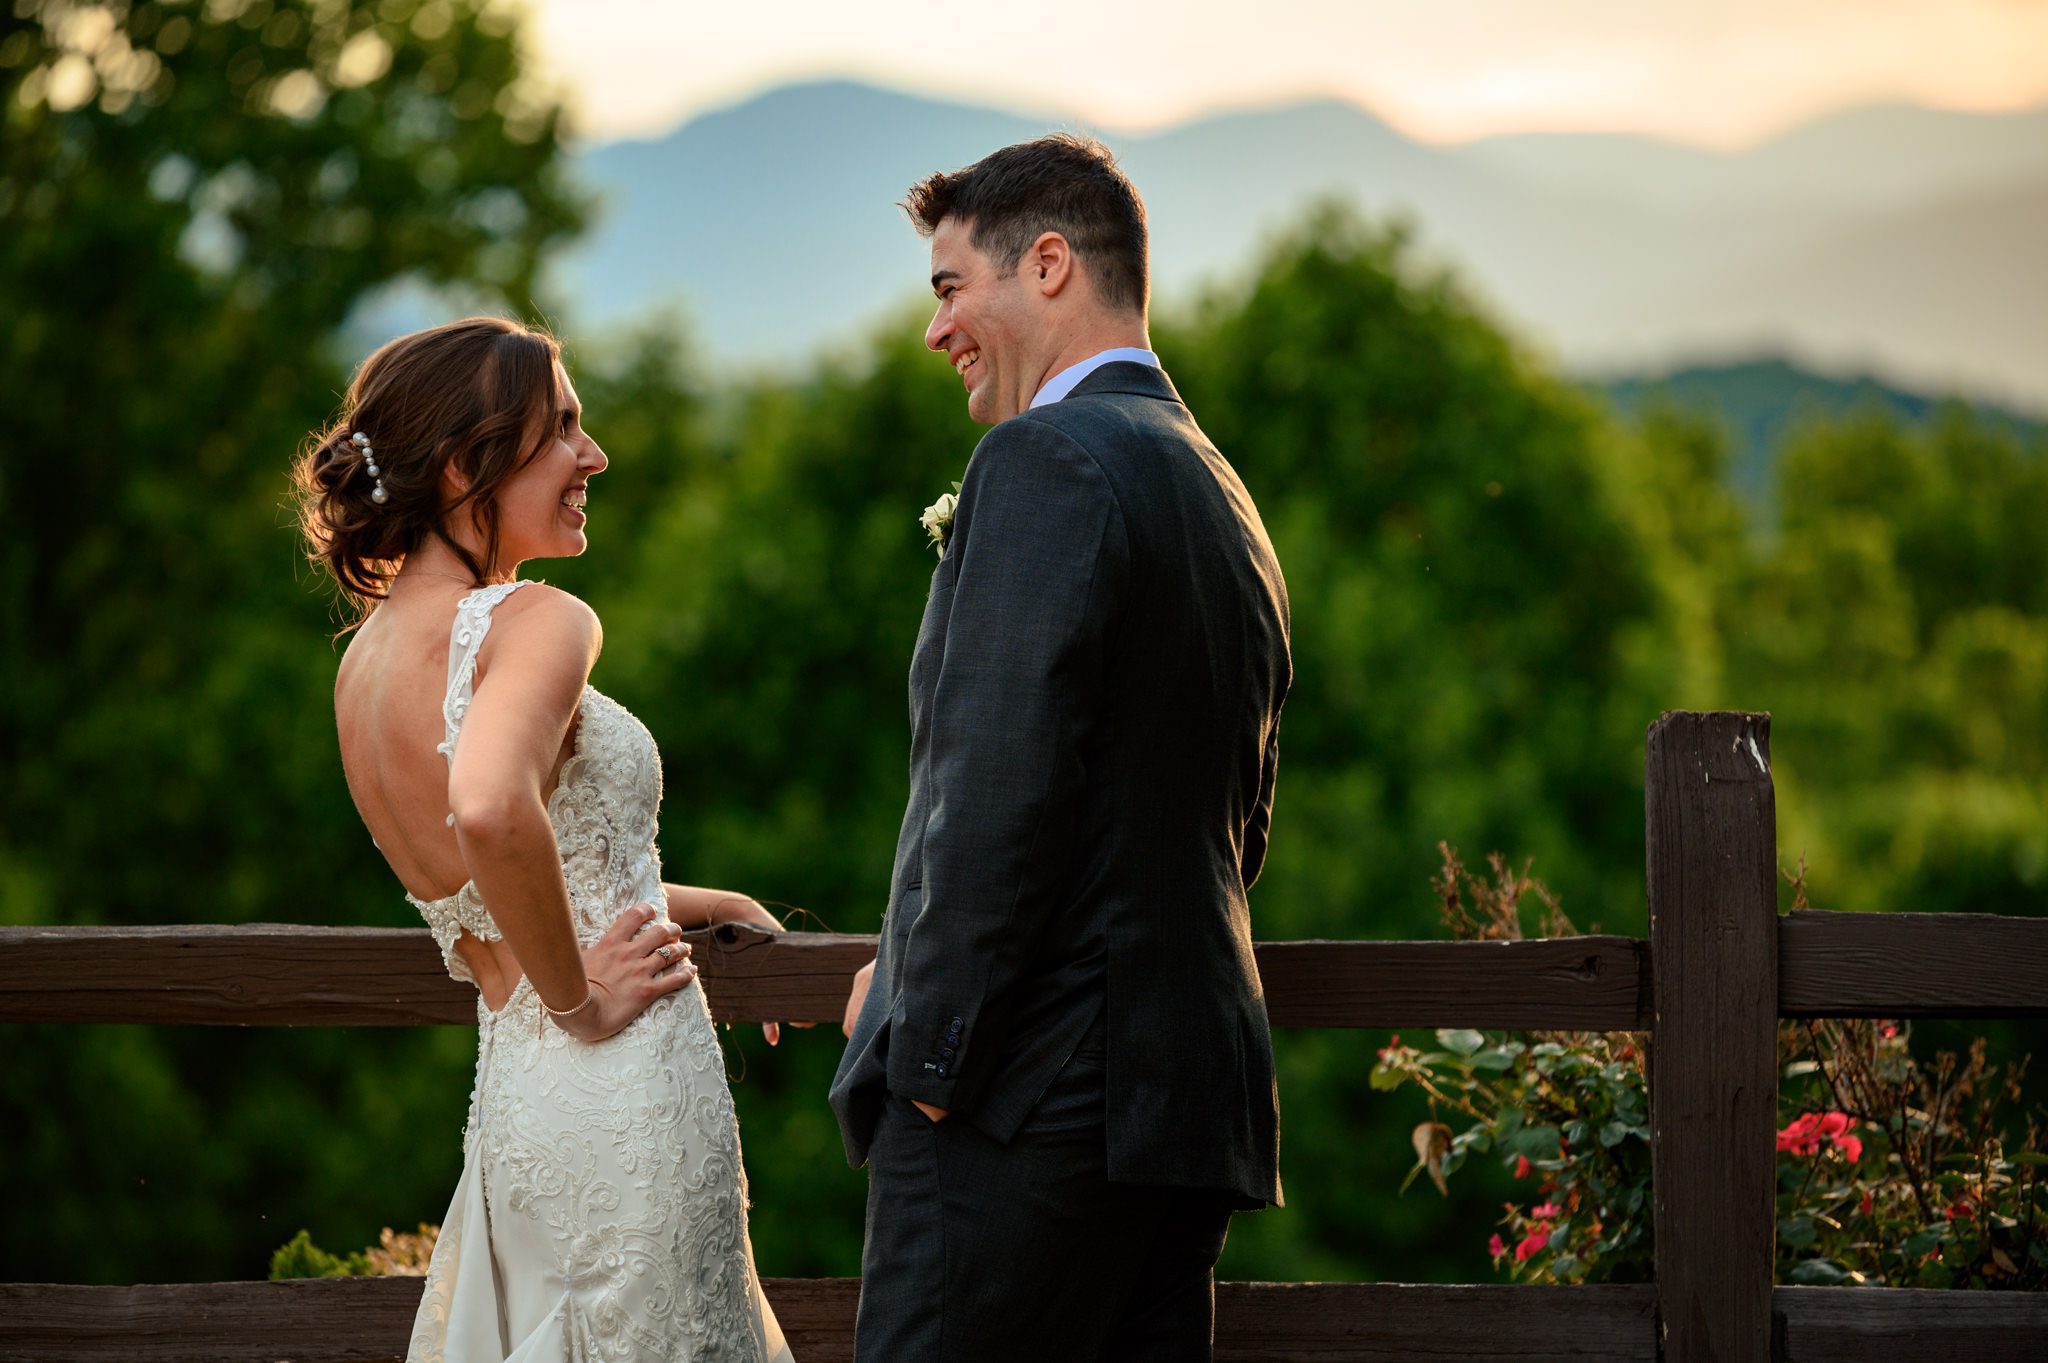 A documentary wedding photographer capturing a bride and groom at the Crest Pavilion, standing on a fence overlooking mountains.